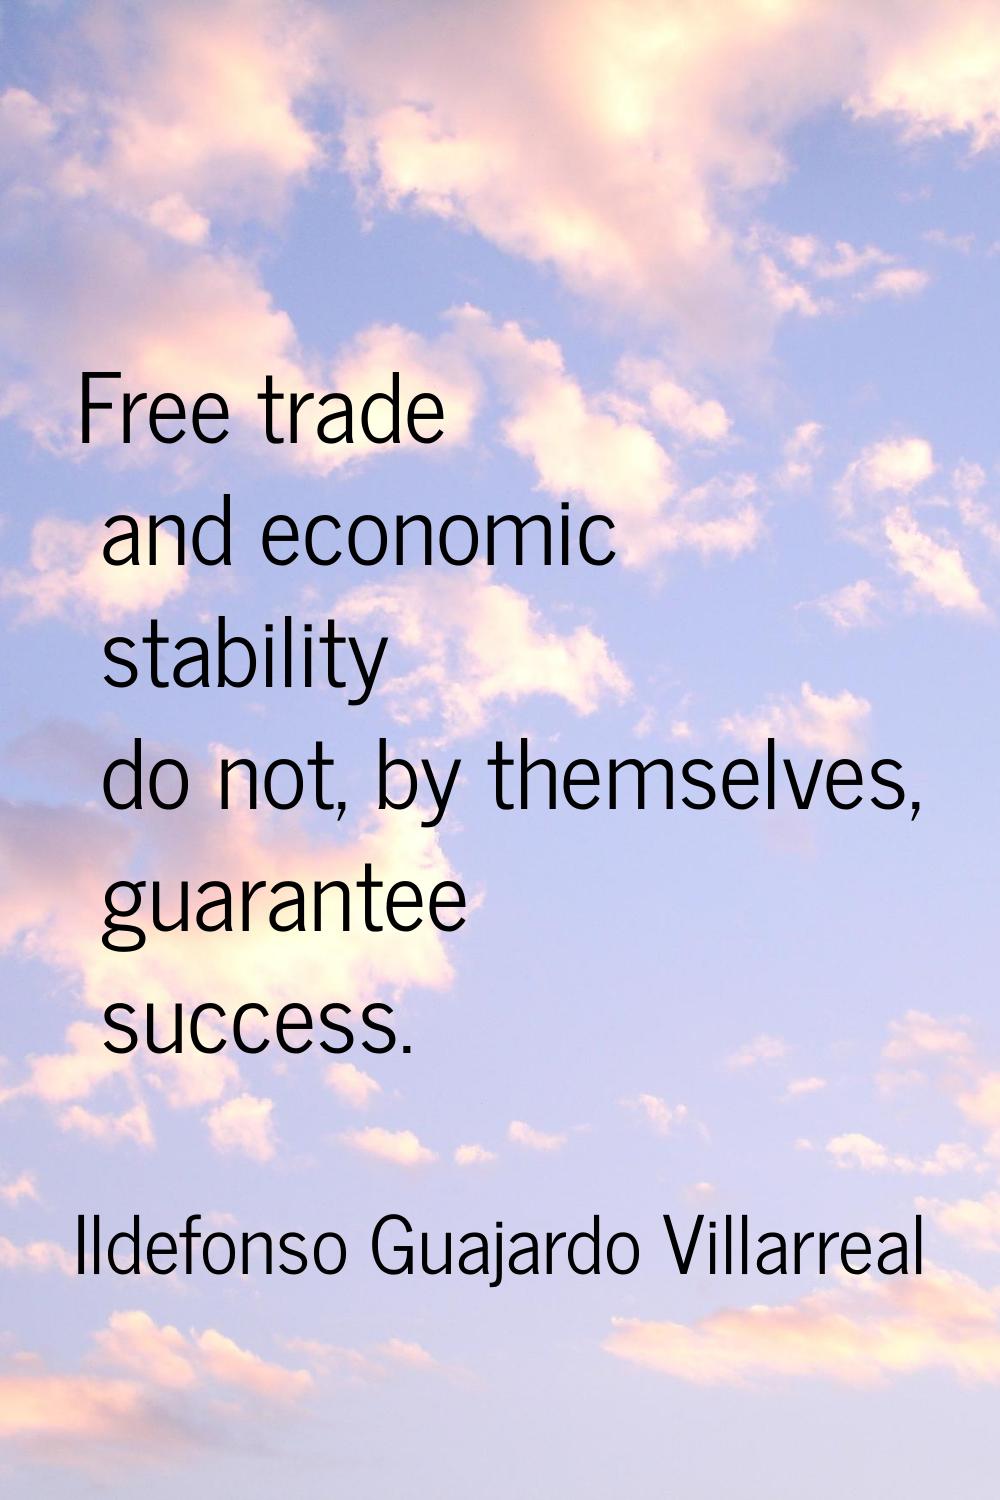 Free trade and economic stability do not, by themselves, guarantee success.